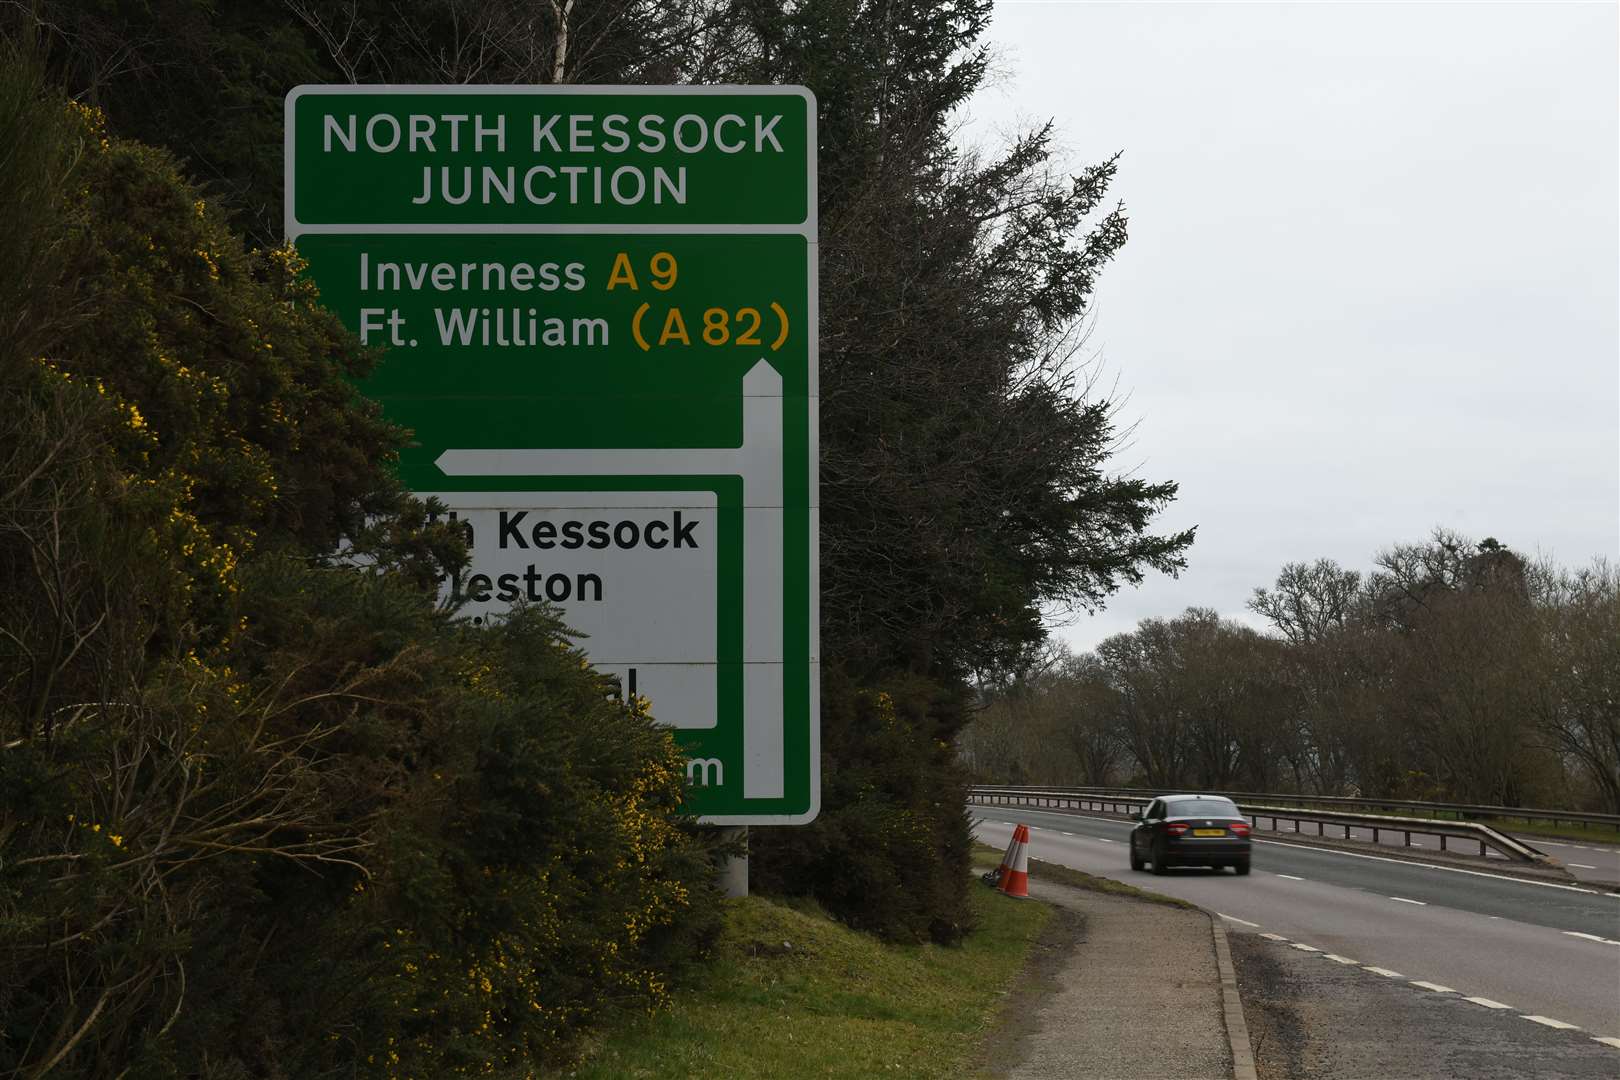 The sign has been removed from below the sign for the North Kessock Junction.